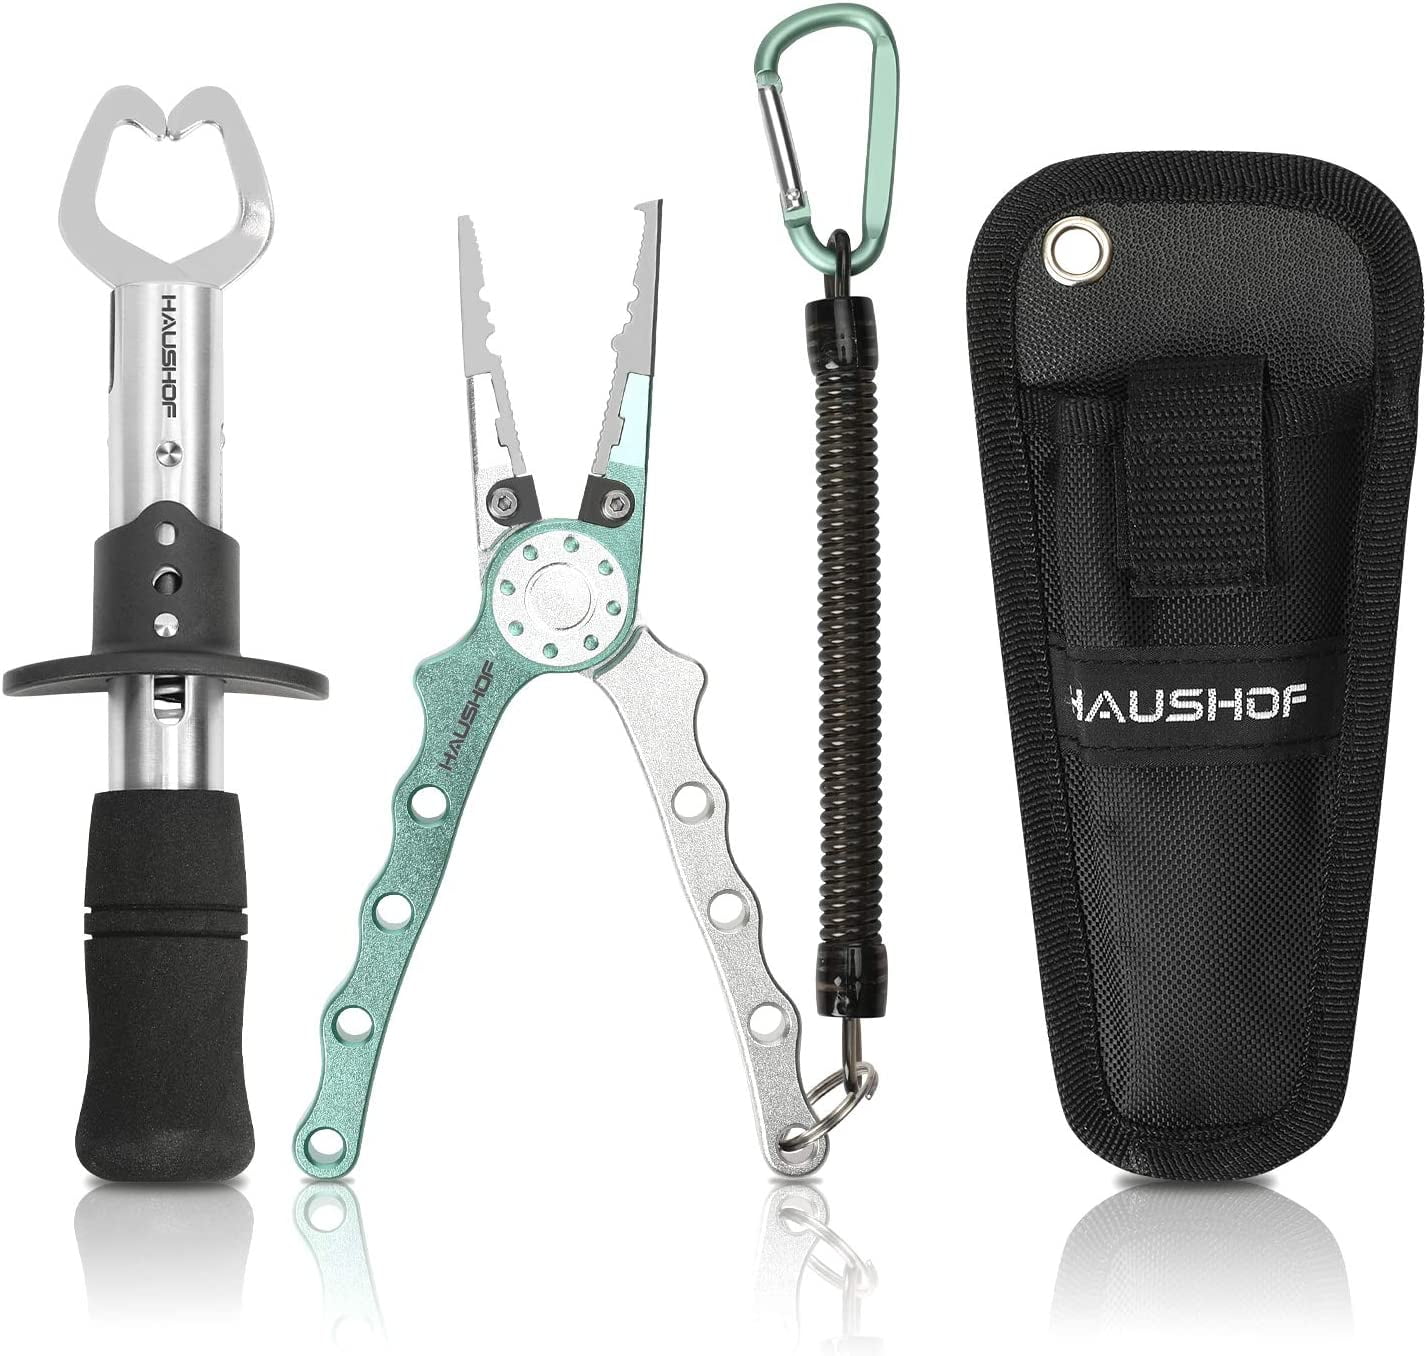 HAUSHOF 3PC Fishing Tool Kit, Stainless Steel Fish Lip Gripper, Aluminum Fishing  Pliers with Sheath, Fish Hook Remover with Safety Coiled Lanyard 